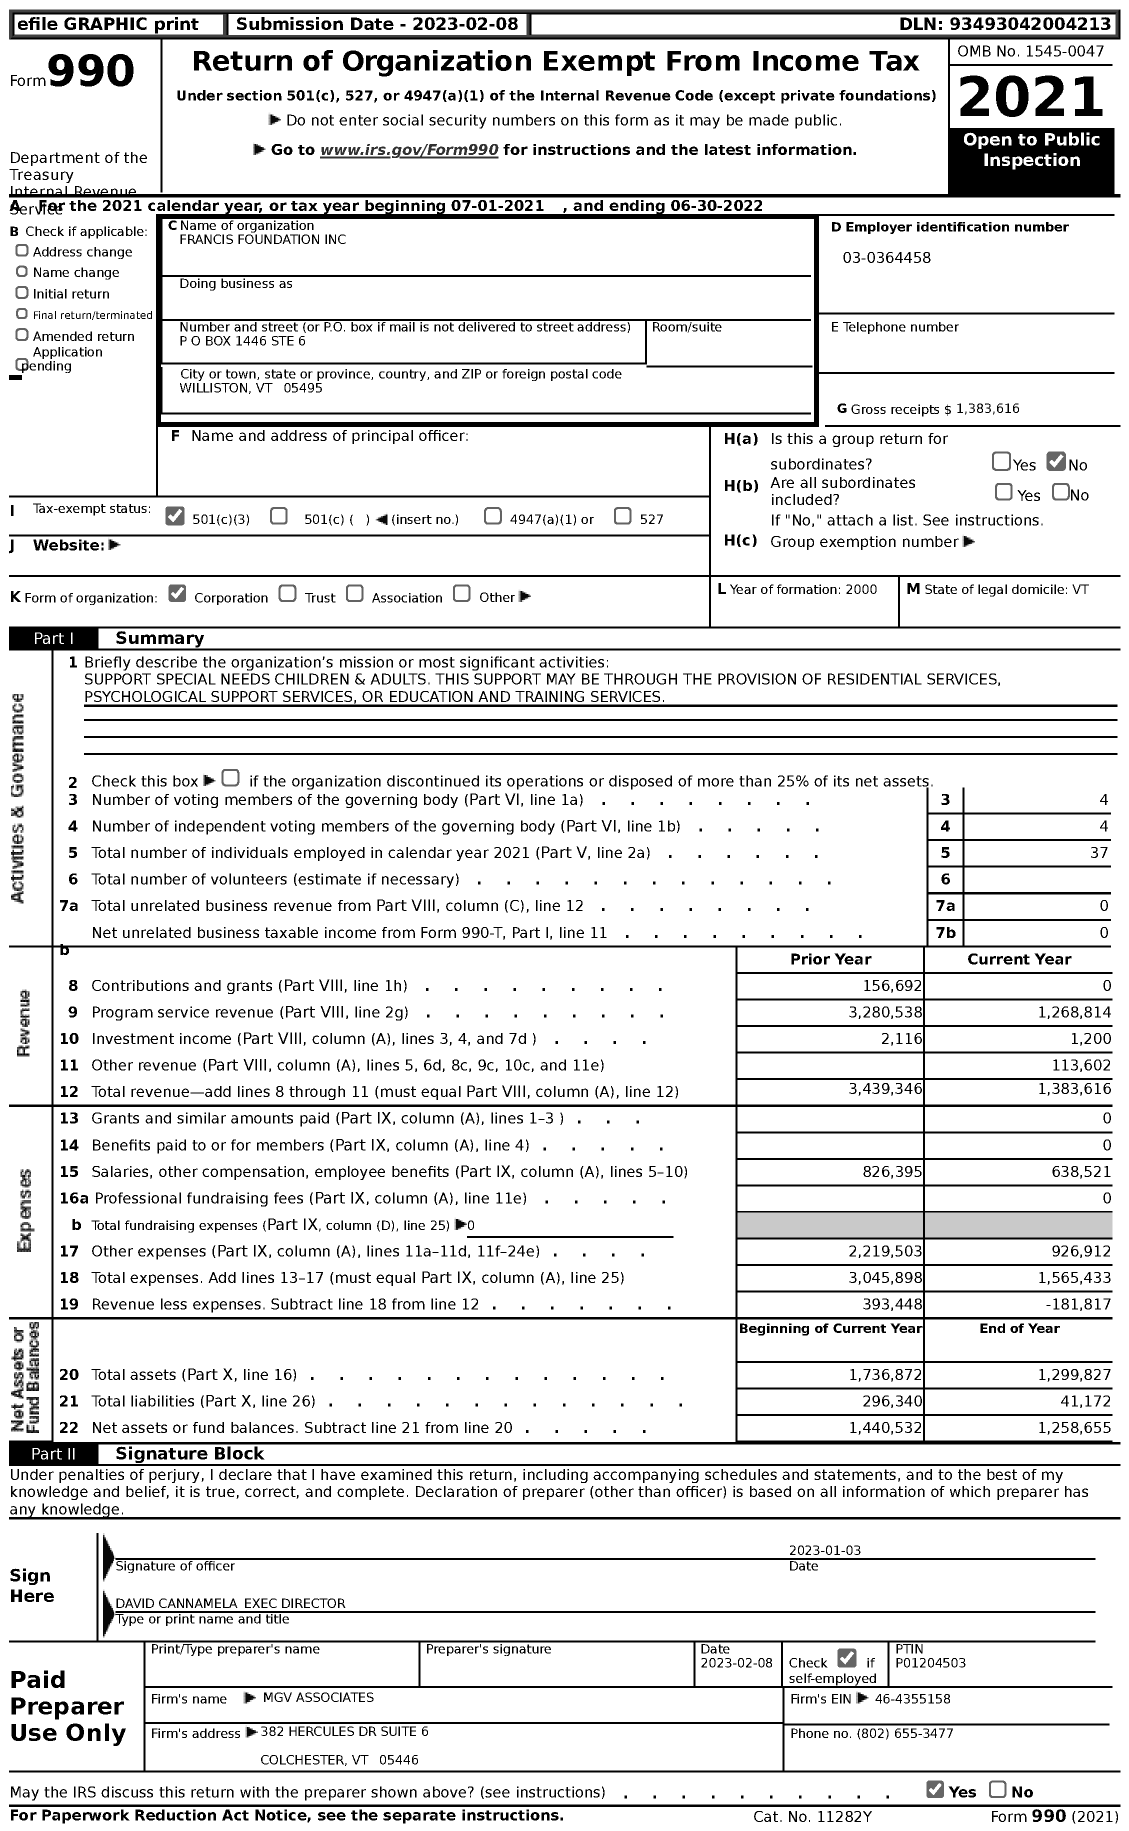 Image of first page of 2021 Form 990 for Francis Foundation / MGV Associates